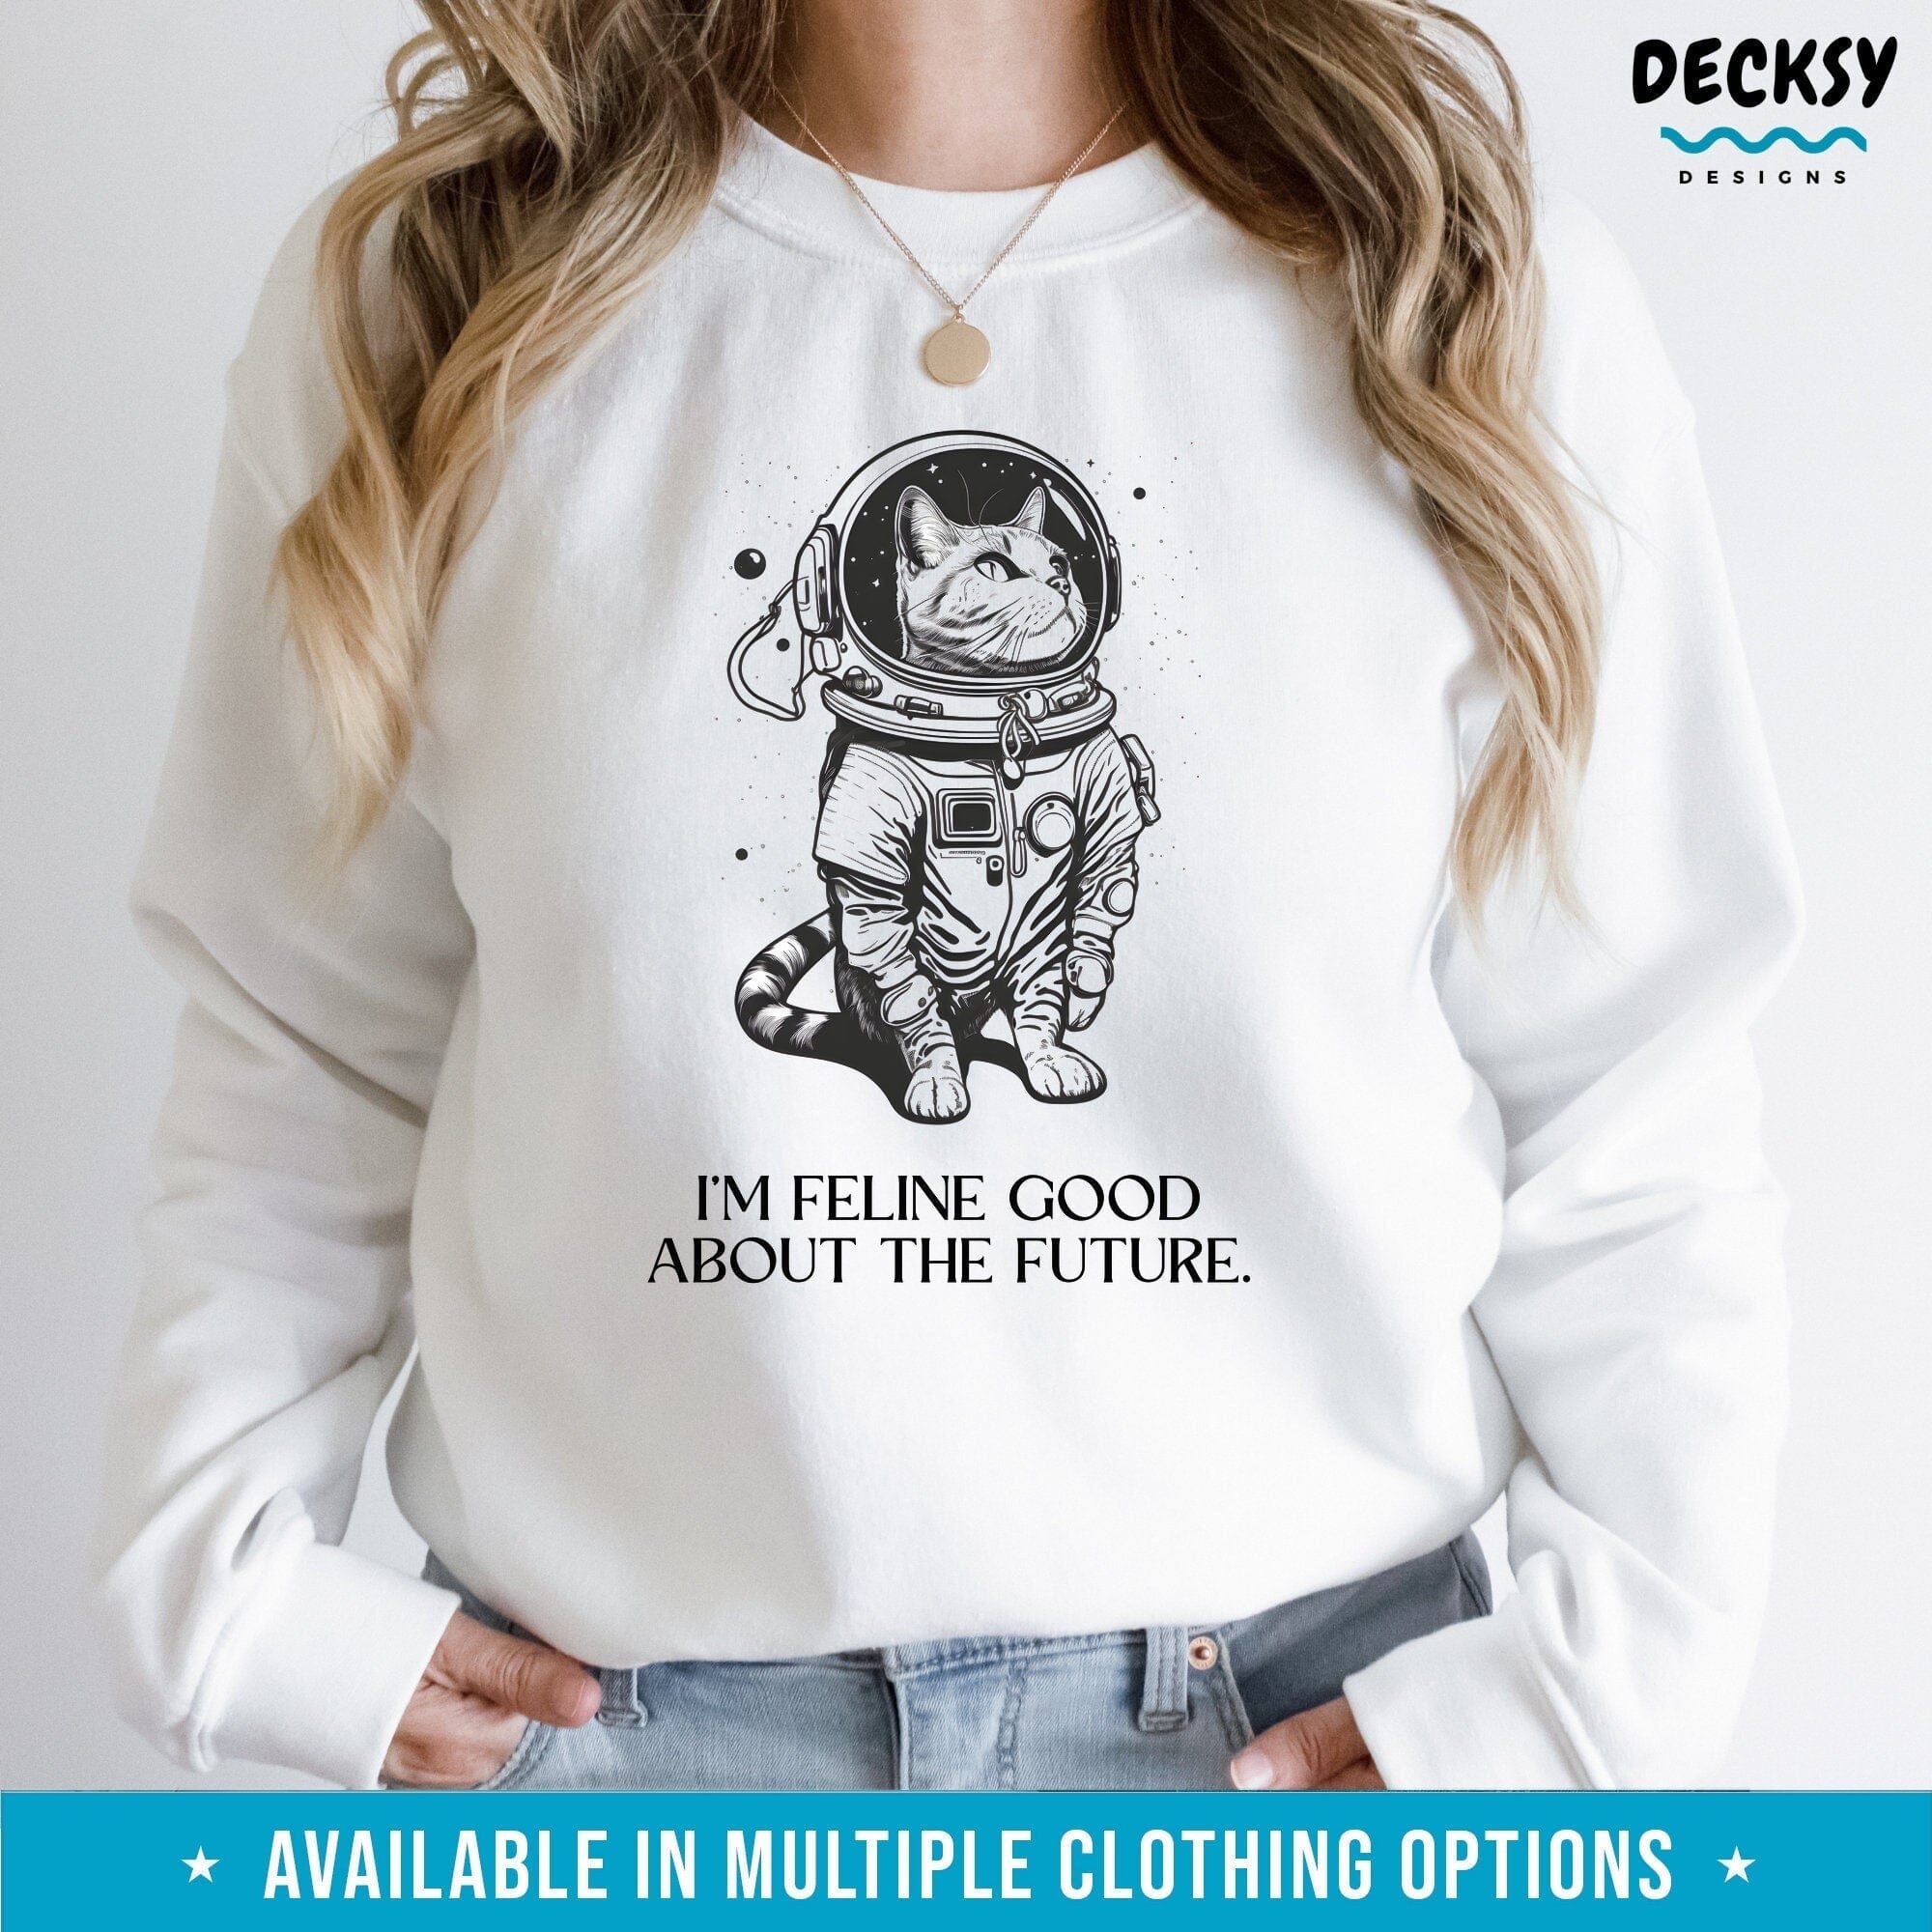 Astronaut Cat Shirt, Cat Lover Gift-Clothing:Gender-Neutral Adult Clothing:Tops & Tees:T-shirts:Graphic Tees-DecksyDesigns